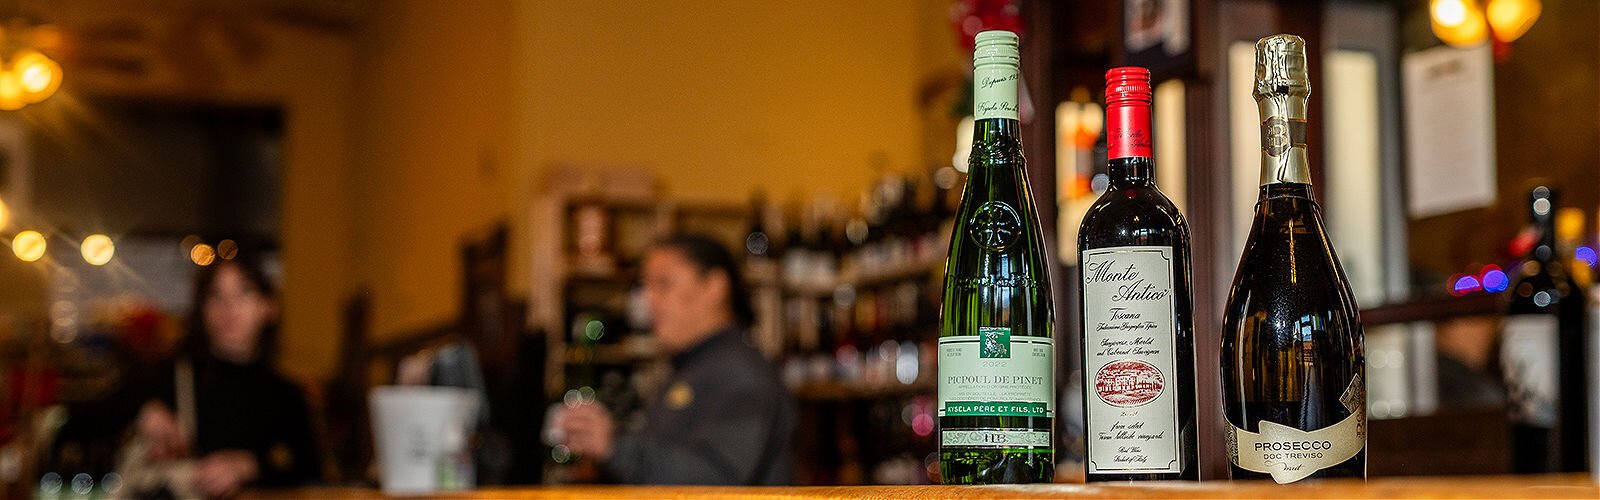 Browse Market Wine's selection of over 600 wines and 300 craft beers.